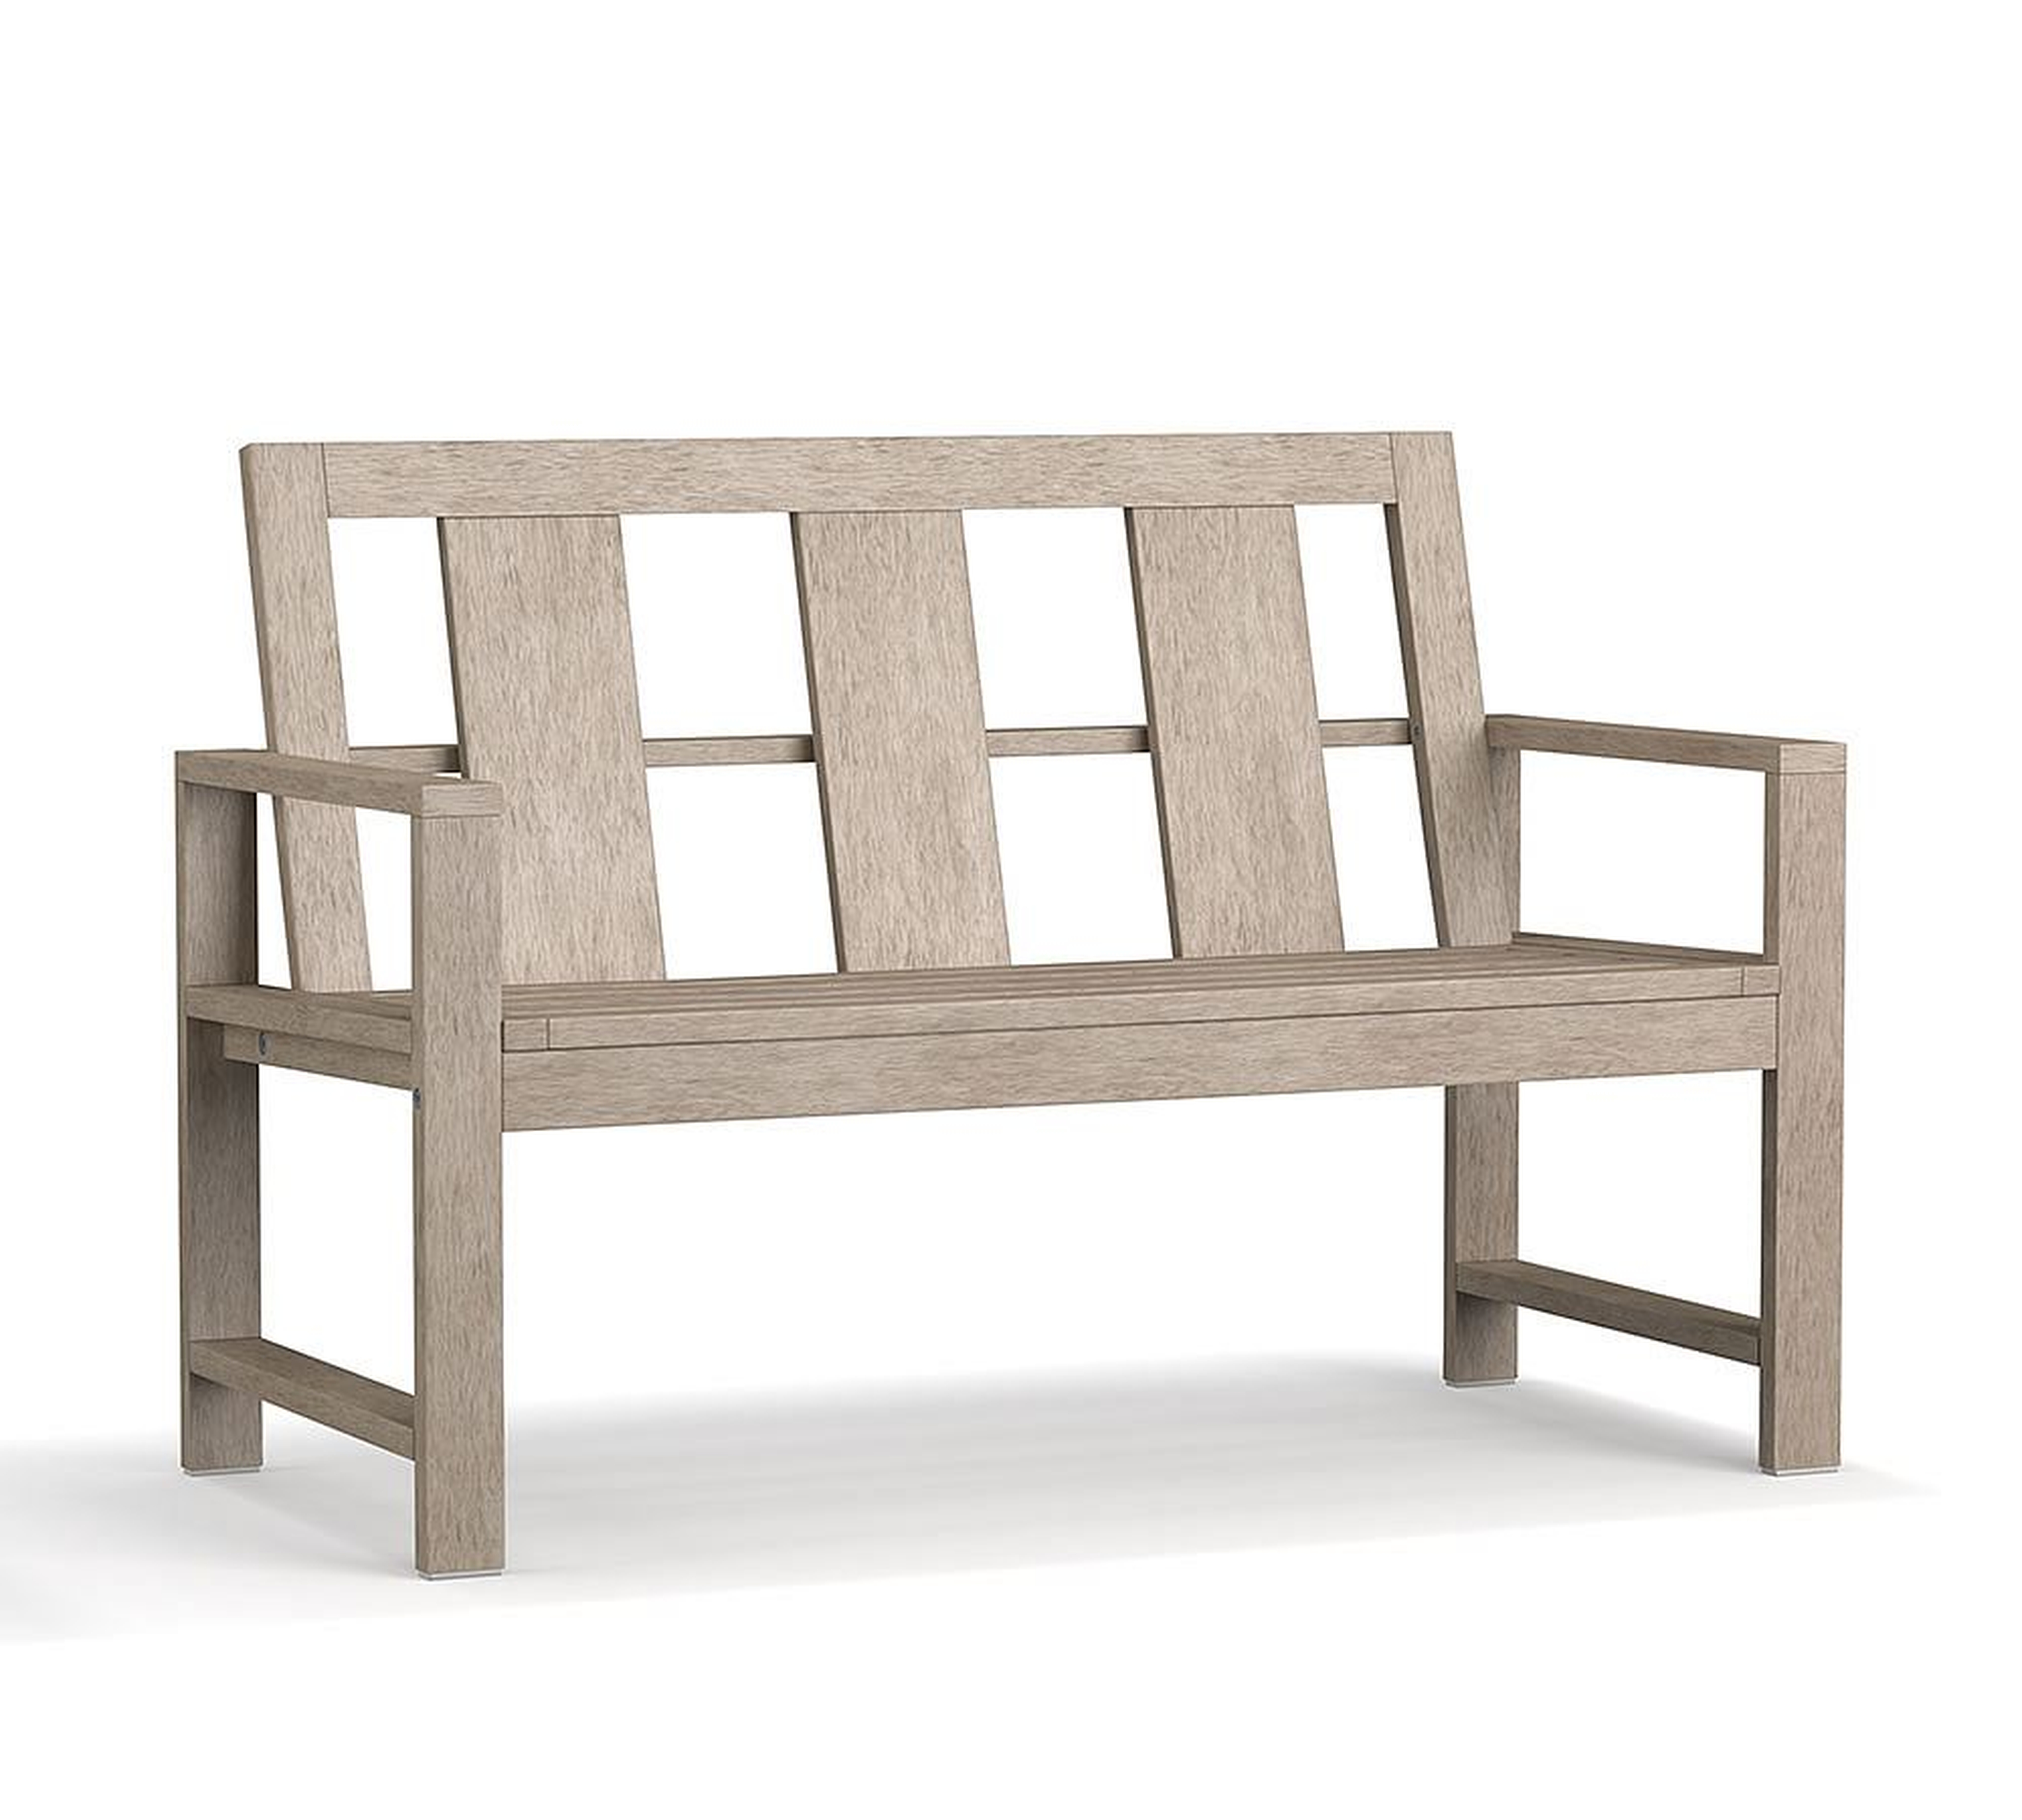 Indio Porch Bench Frame, Weathered Gray - Pottery Barn